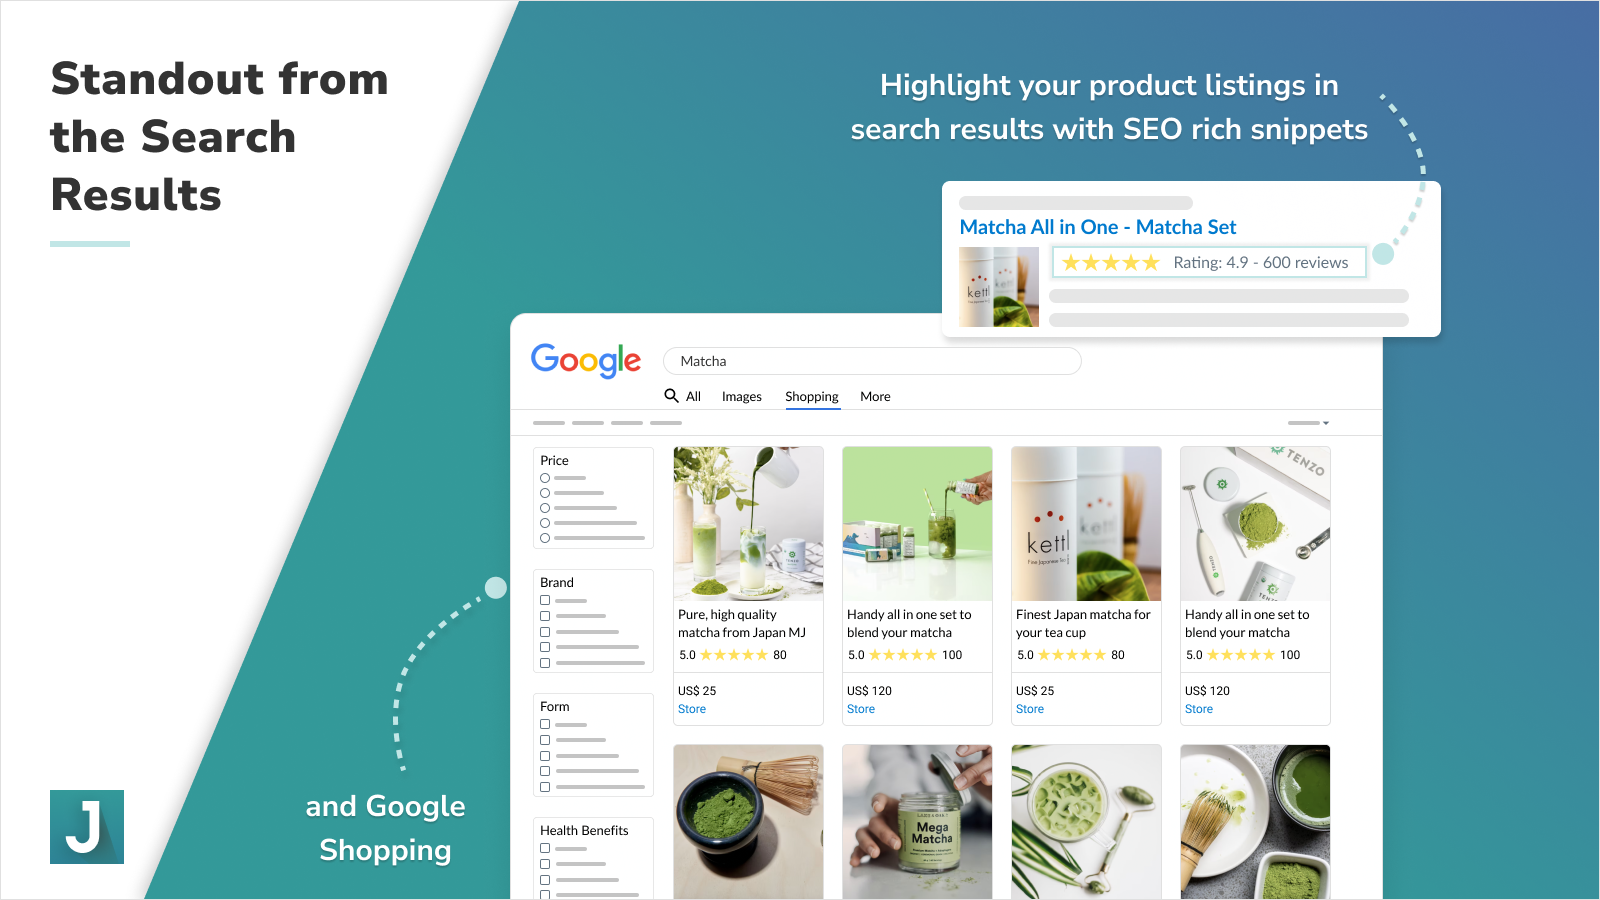 SEO rich snippets in search results and Google Shopping